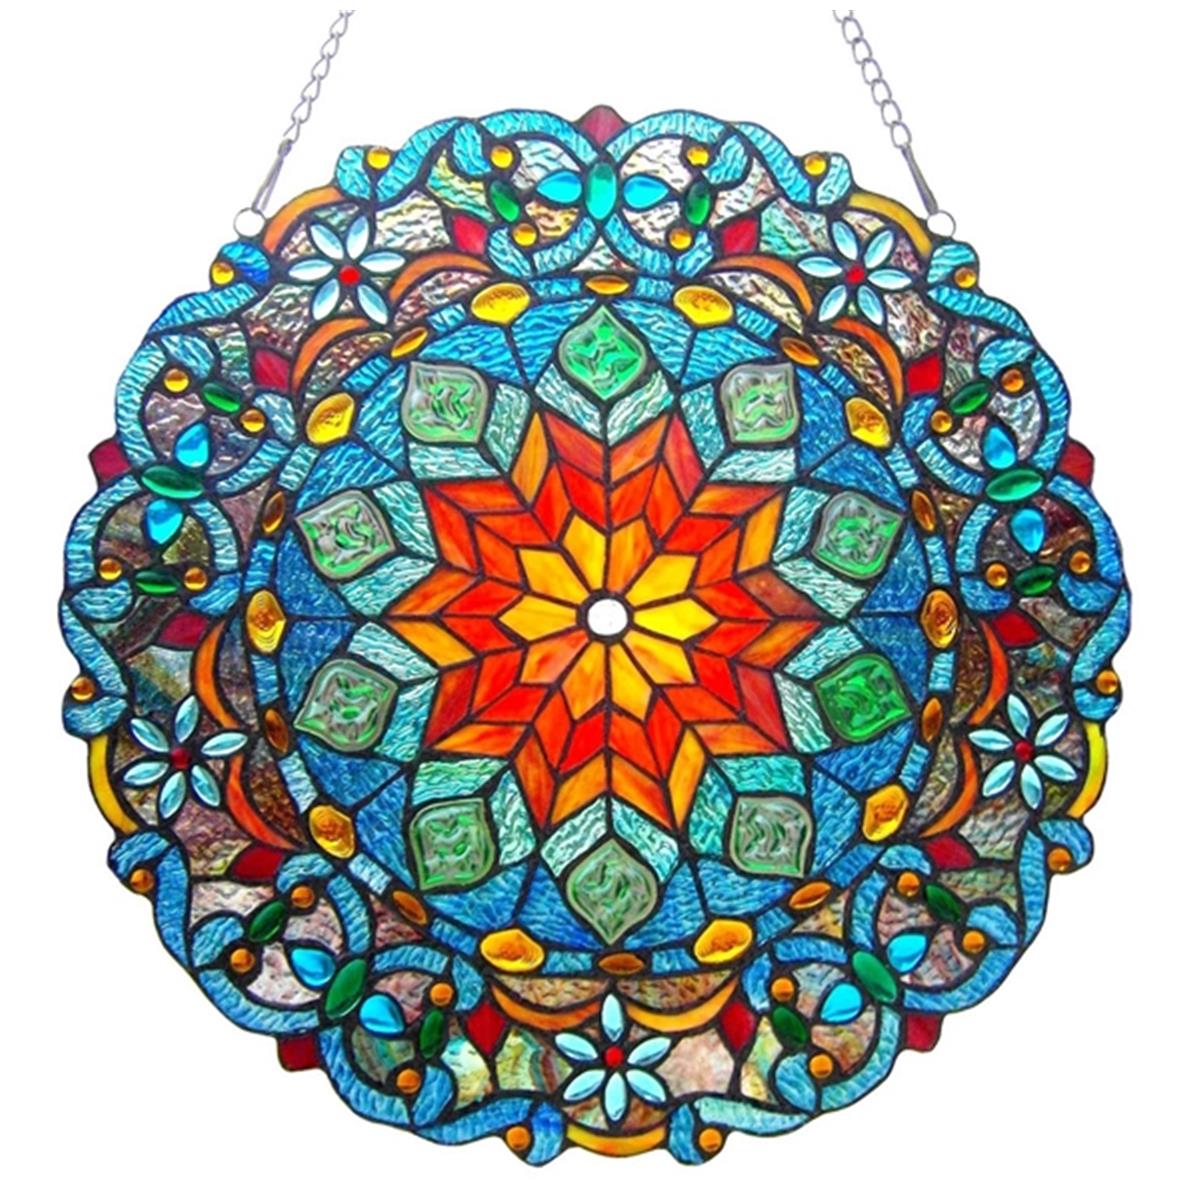 Ch1p148mb21-gpn 21 In. Lighting Blossom Tiffany Glass Round Window Panel